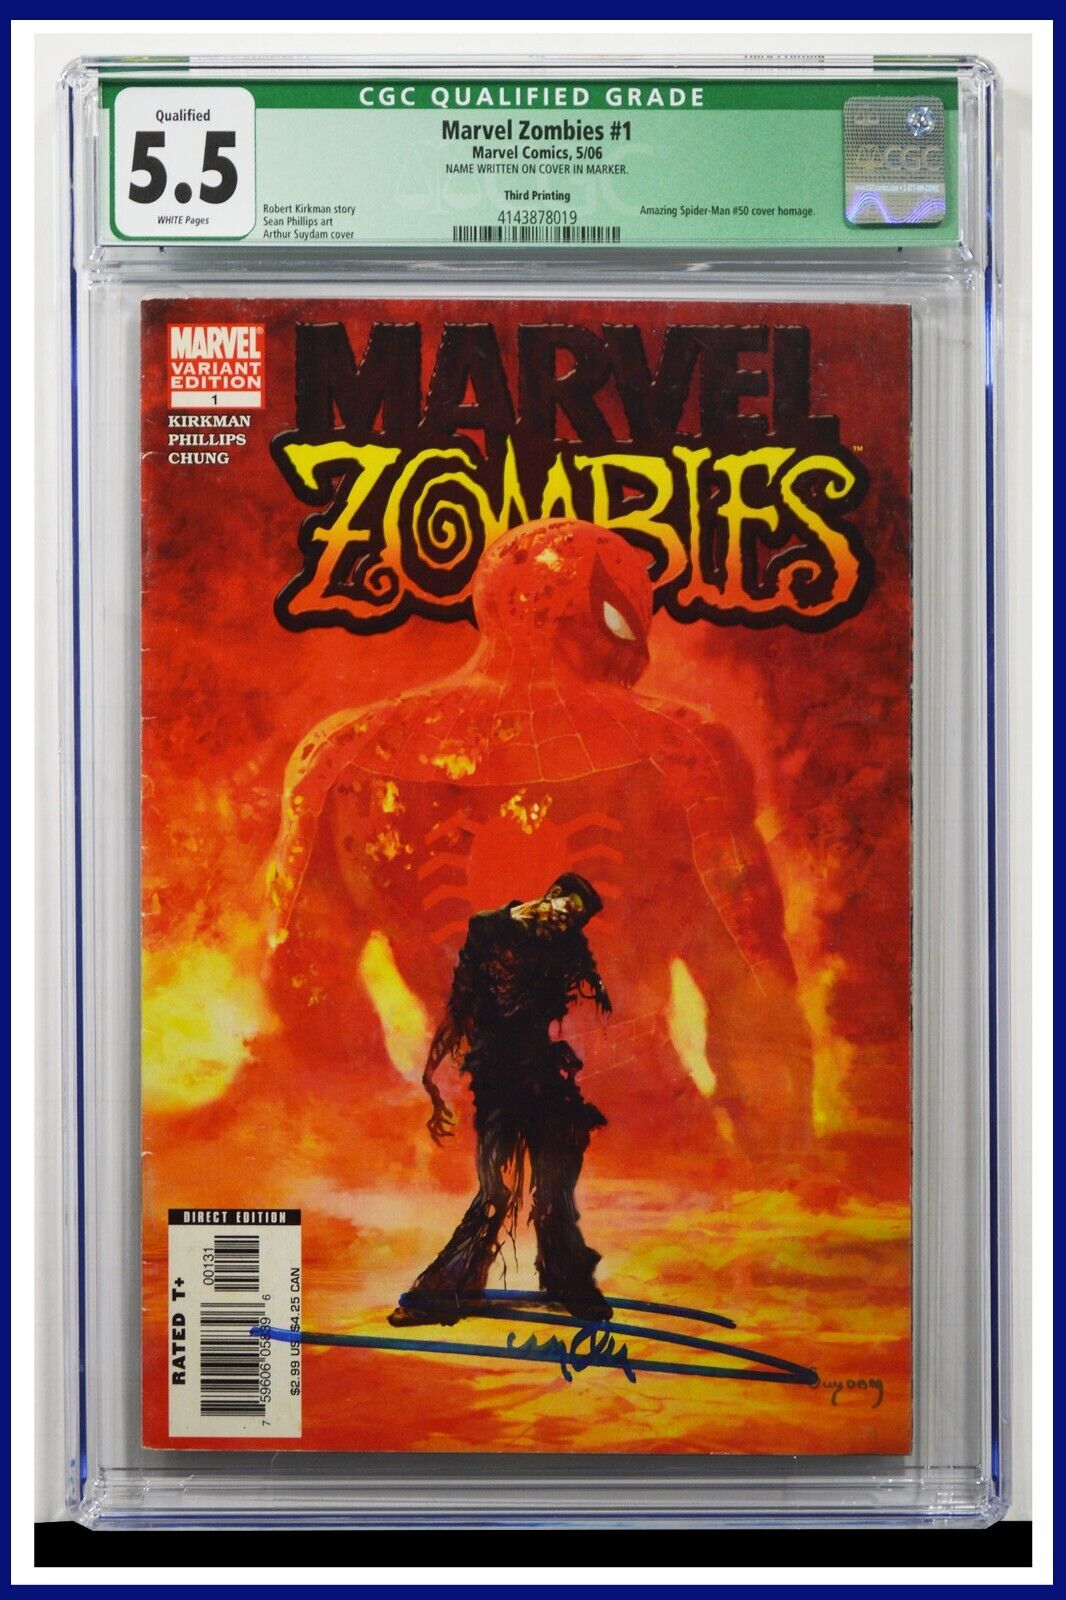 Marvel Zombies #1 CGC Graded 5.5 Marvel May 2006 Signed White Pages Comic Book.